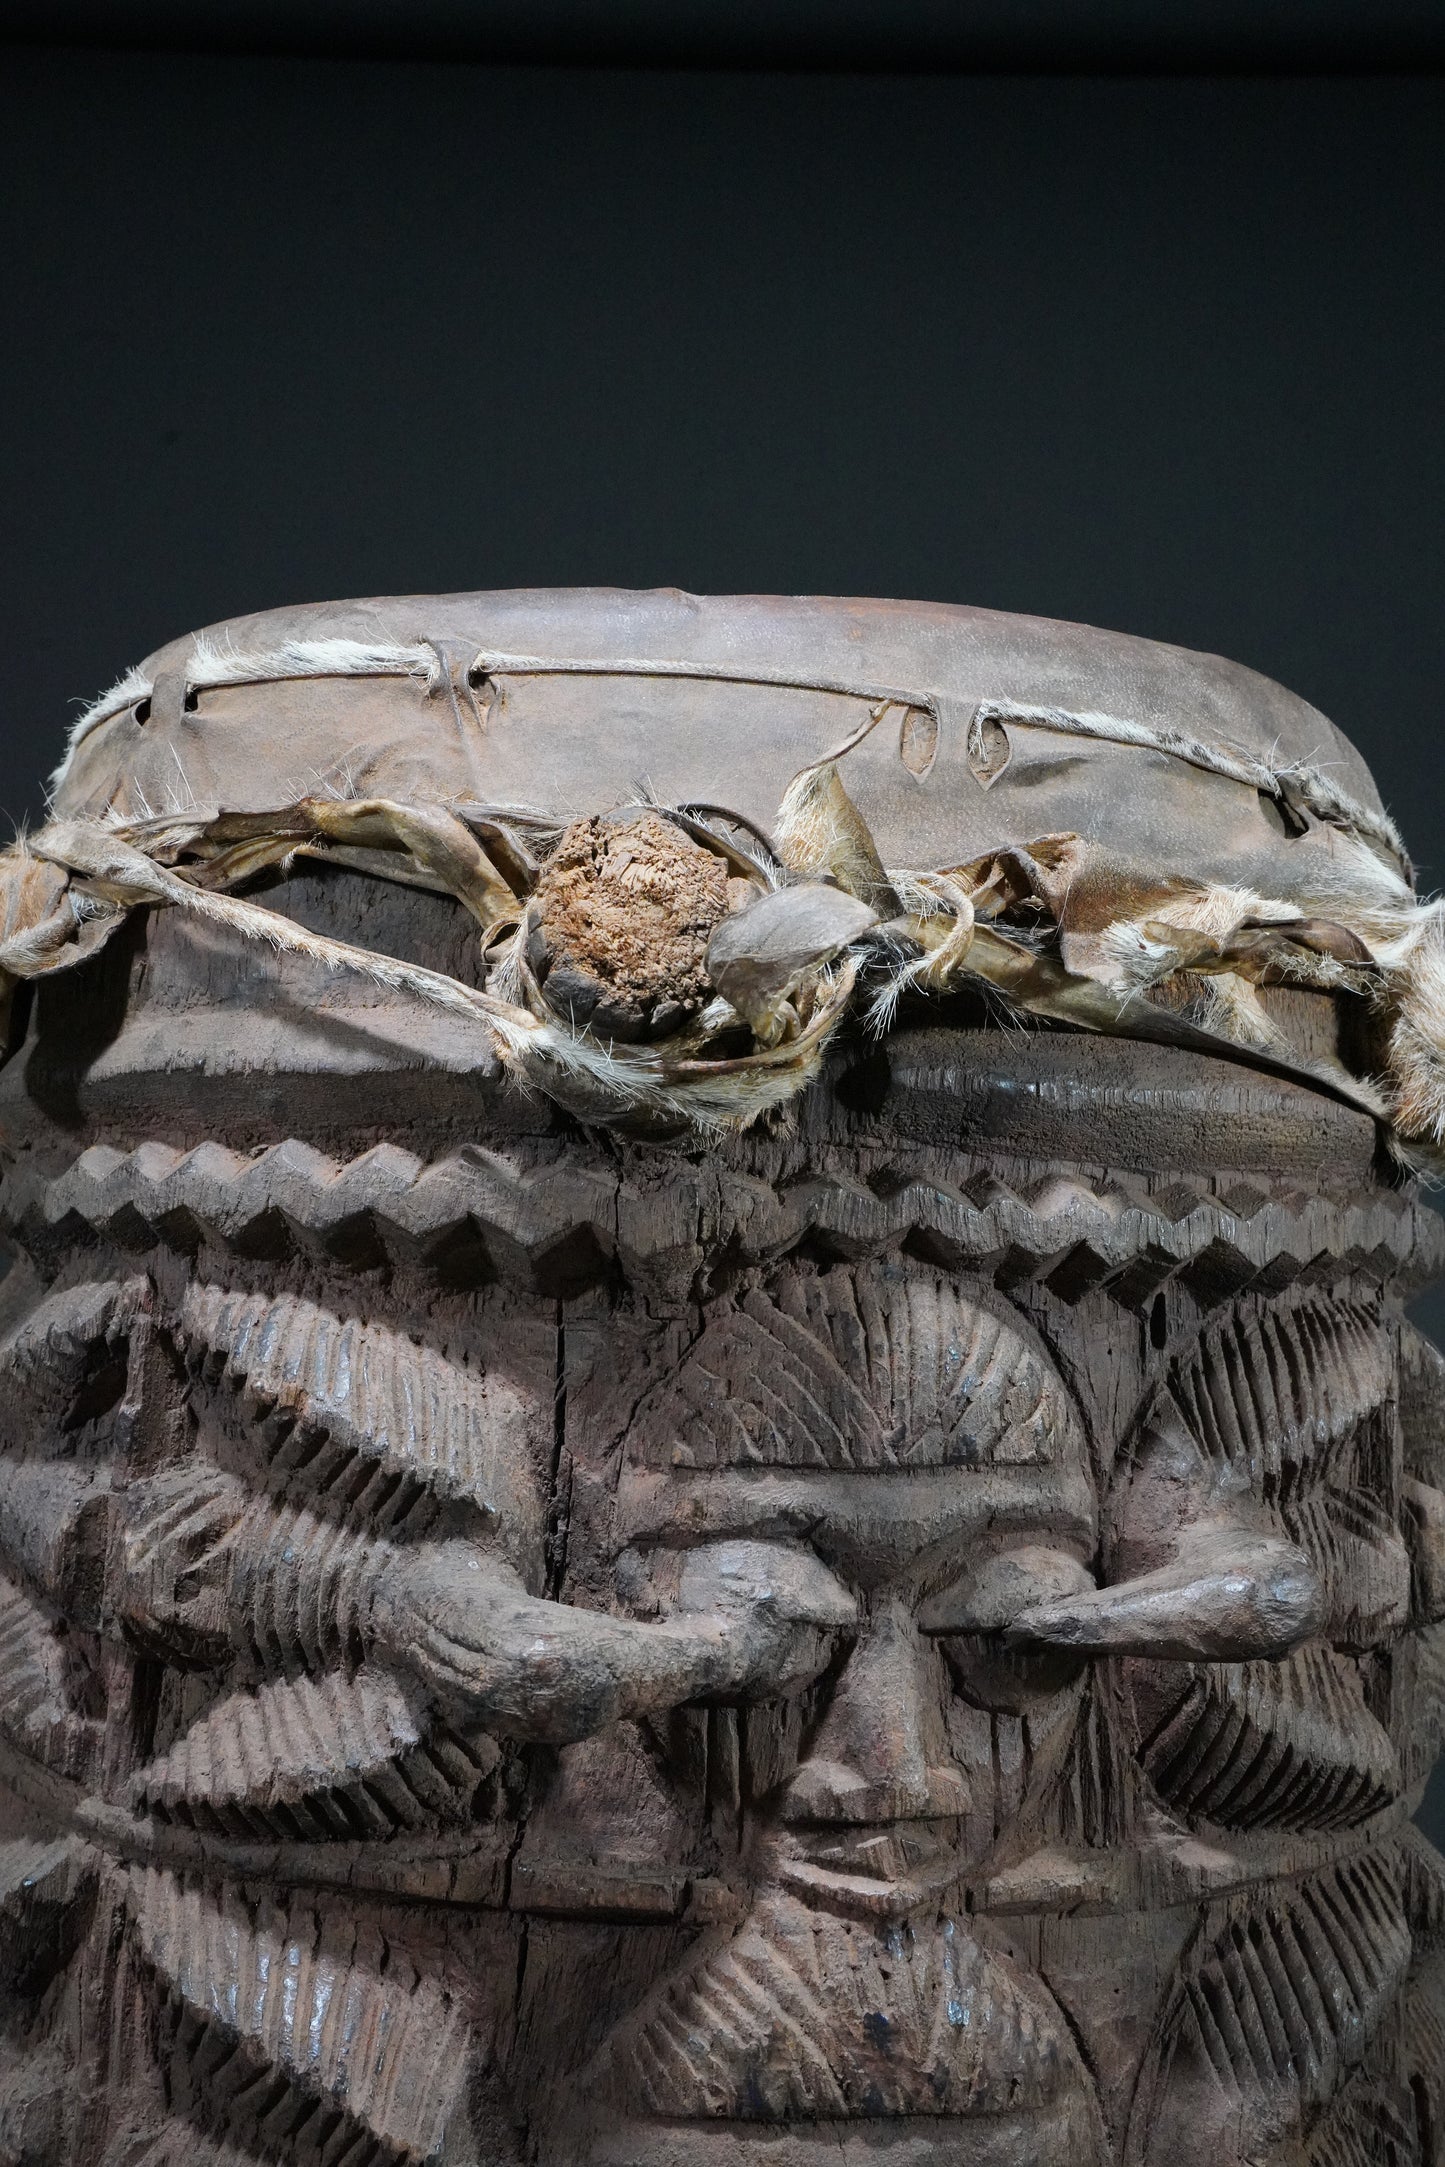 A drum of Olowe of Ise